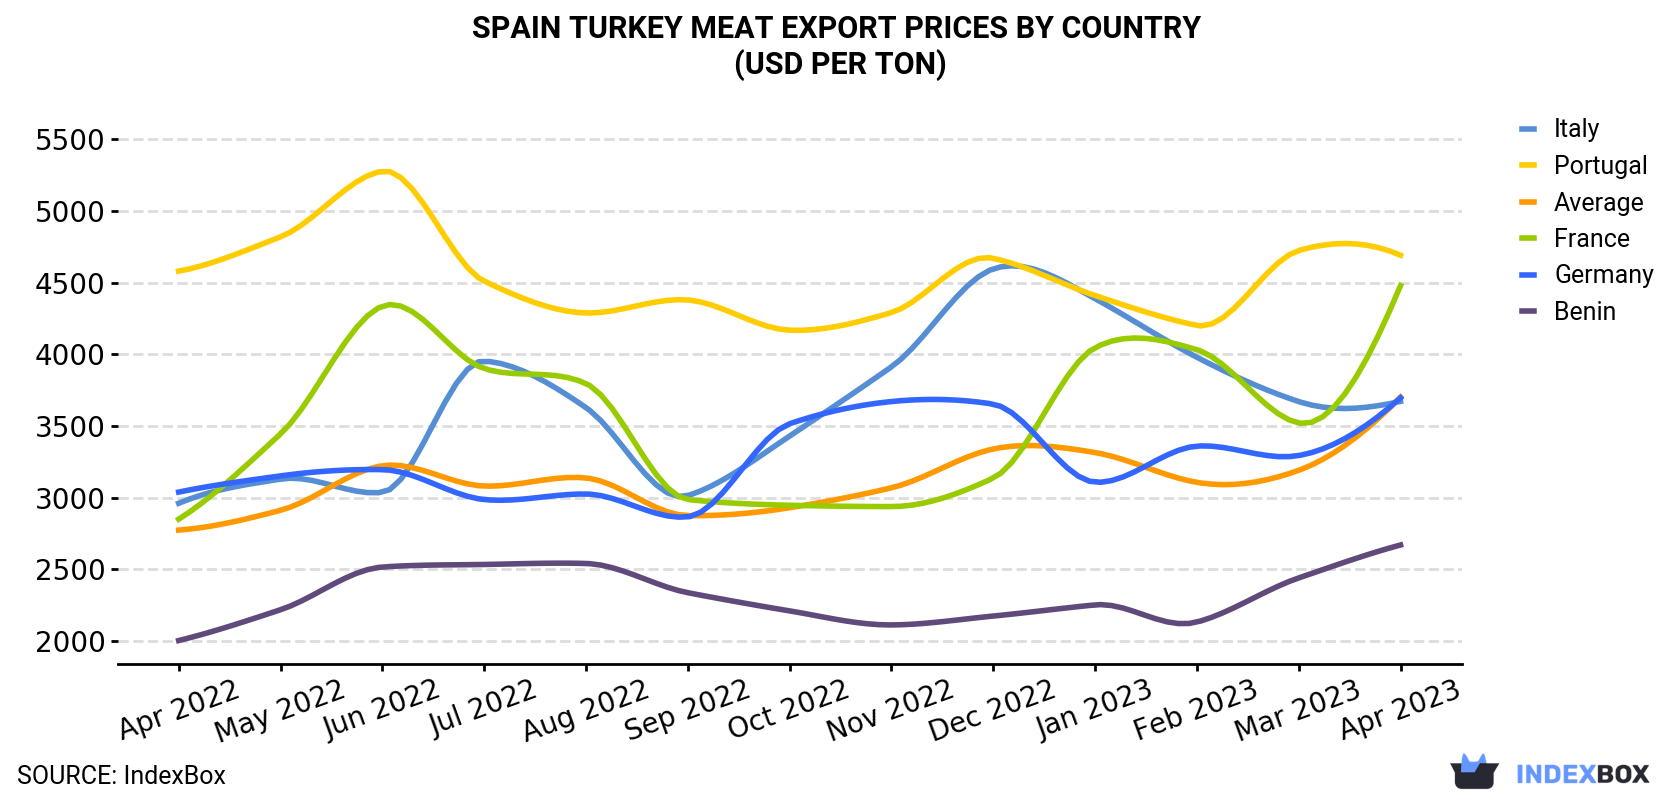 Spain Turkey Meat Export Prices By Country (USD Per Ton)